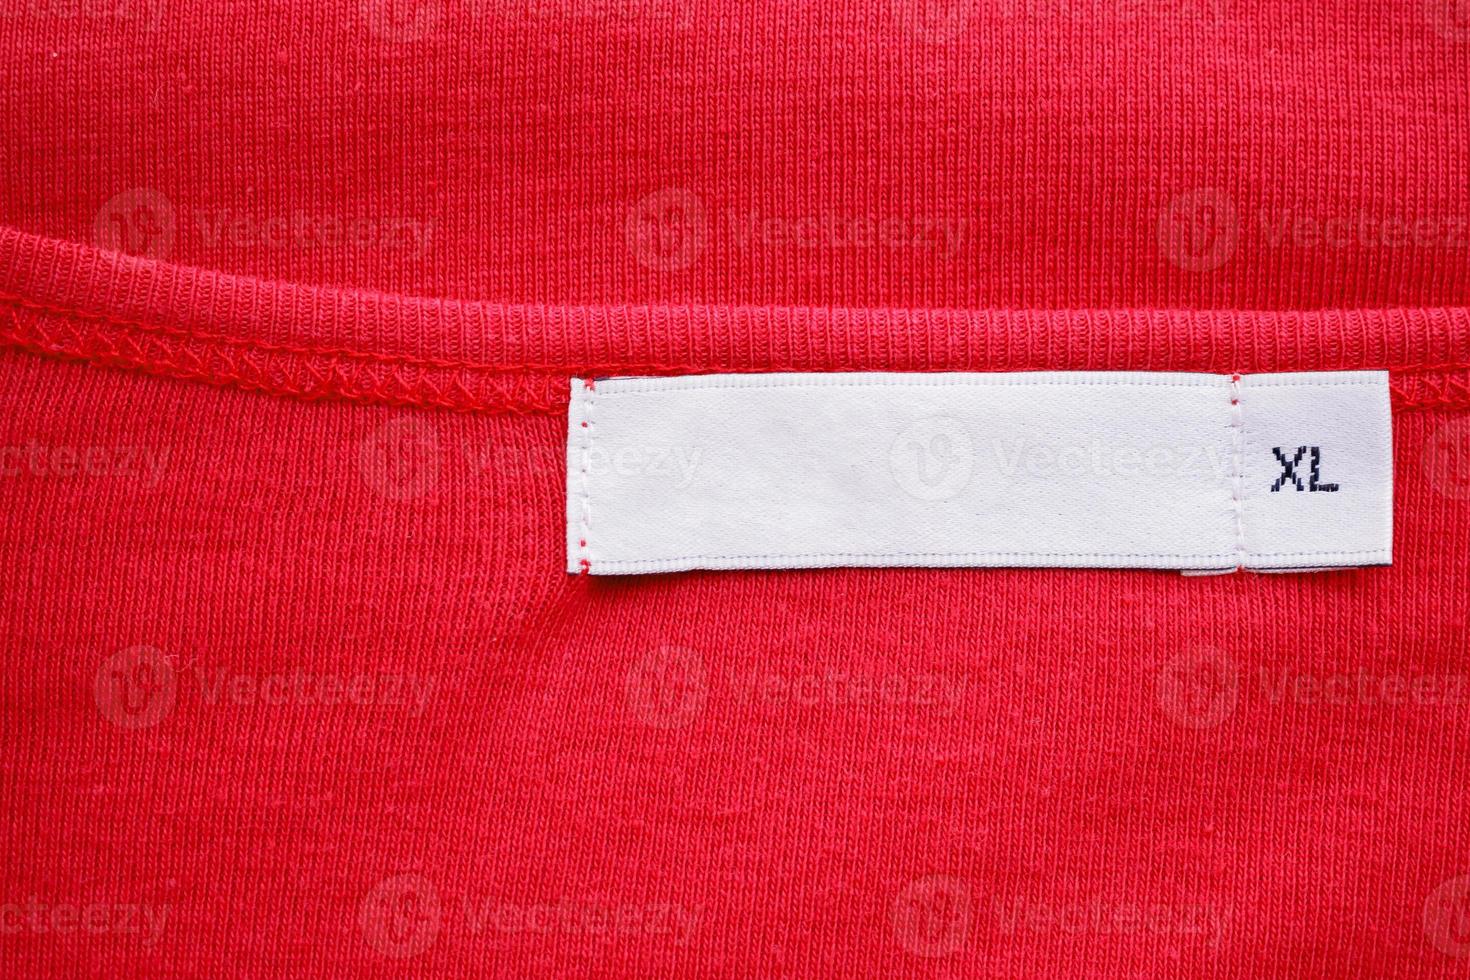 Blank white clothes tag label with XL size on new red shirt photo